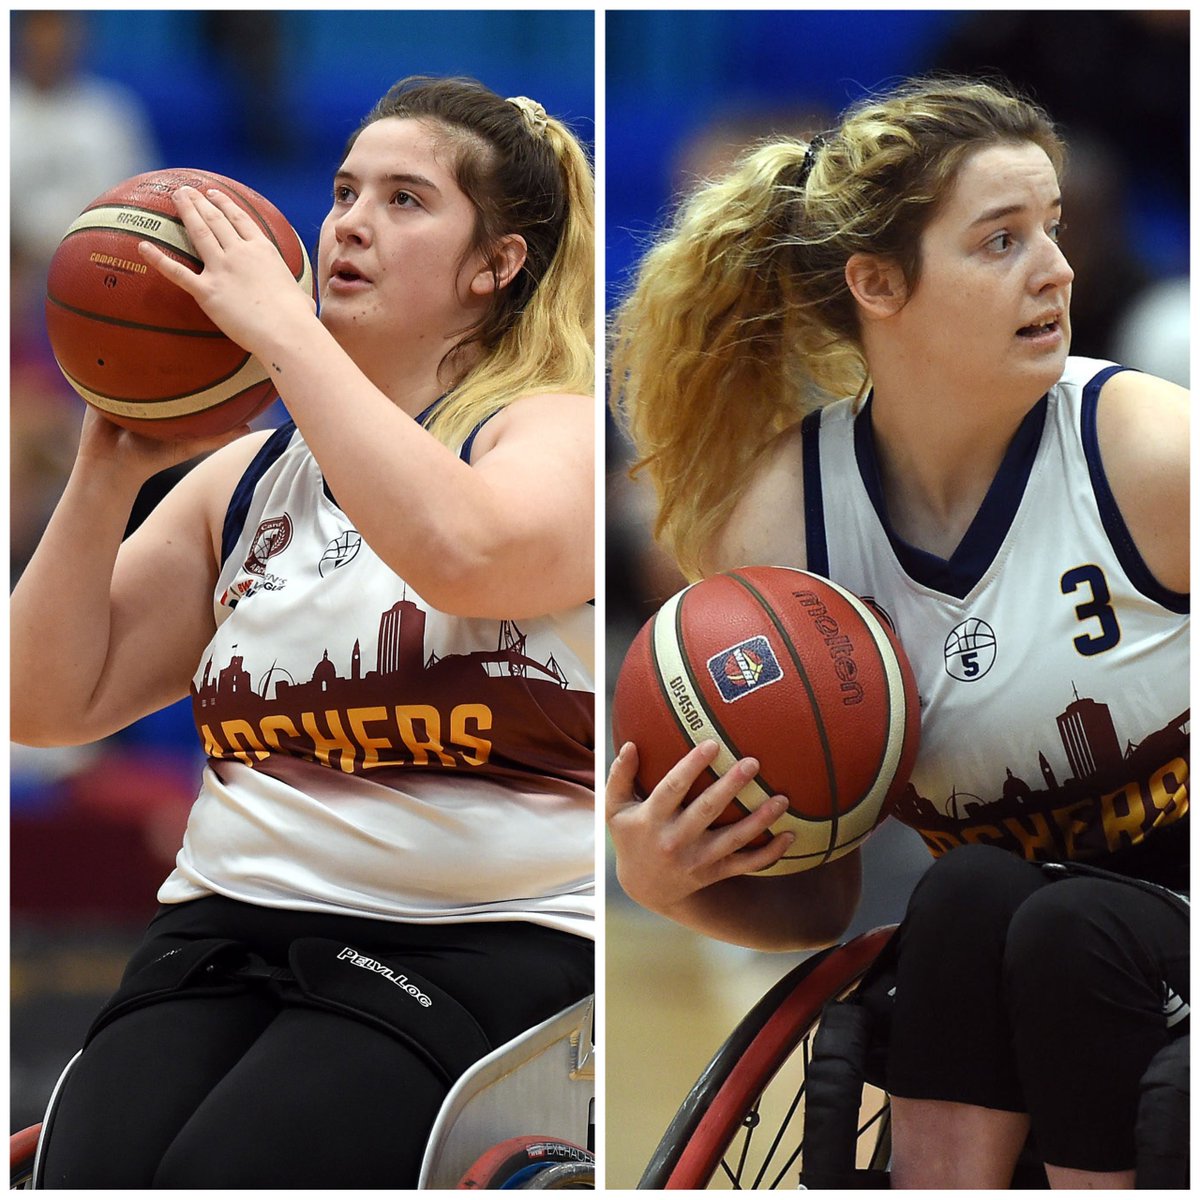 Pob lwc to WPL stars Jade and Adele Atkin as they head off to Dubai today to represent @BritWheelBBall in the @_IWBF World Championships!

Good luck to both teams as they start a busy summer!

#AmdaniArchers #ArcherFamily